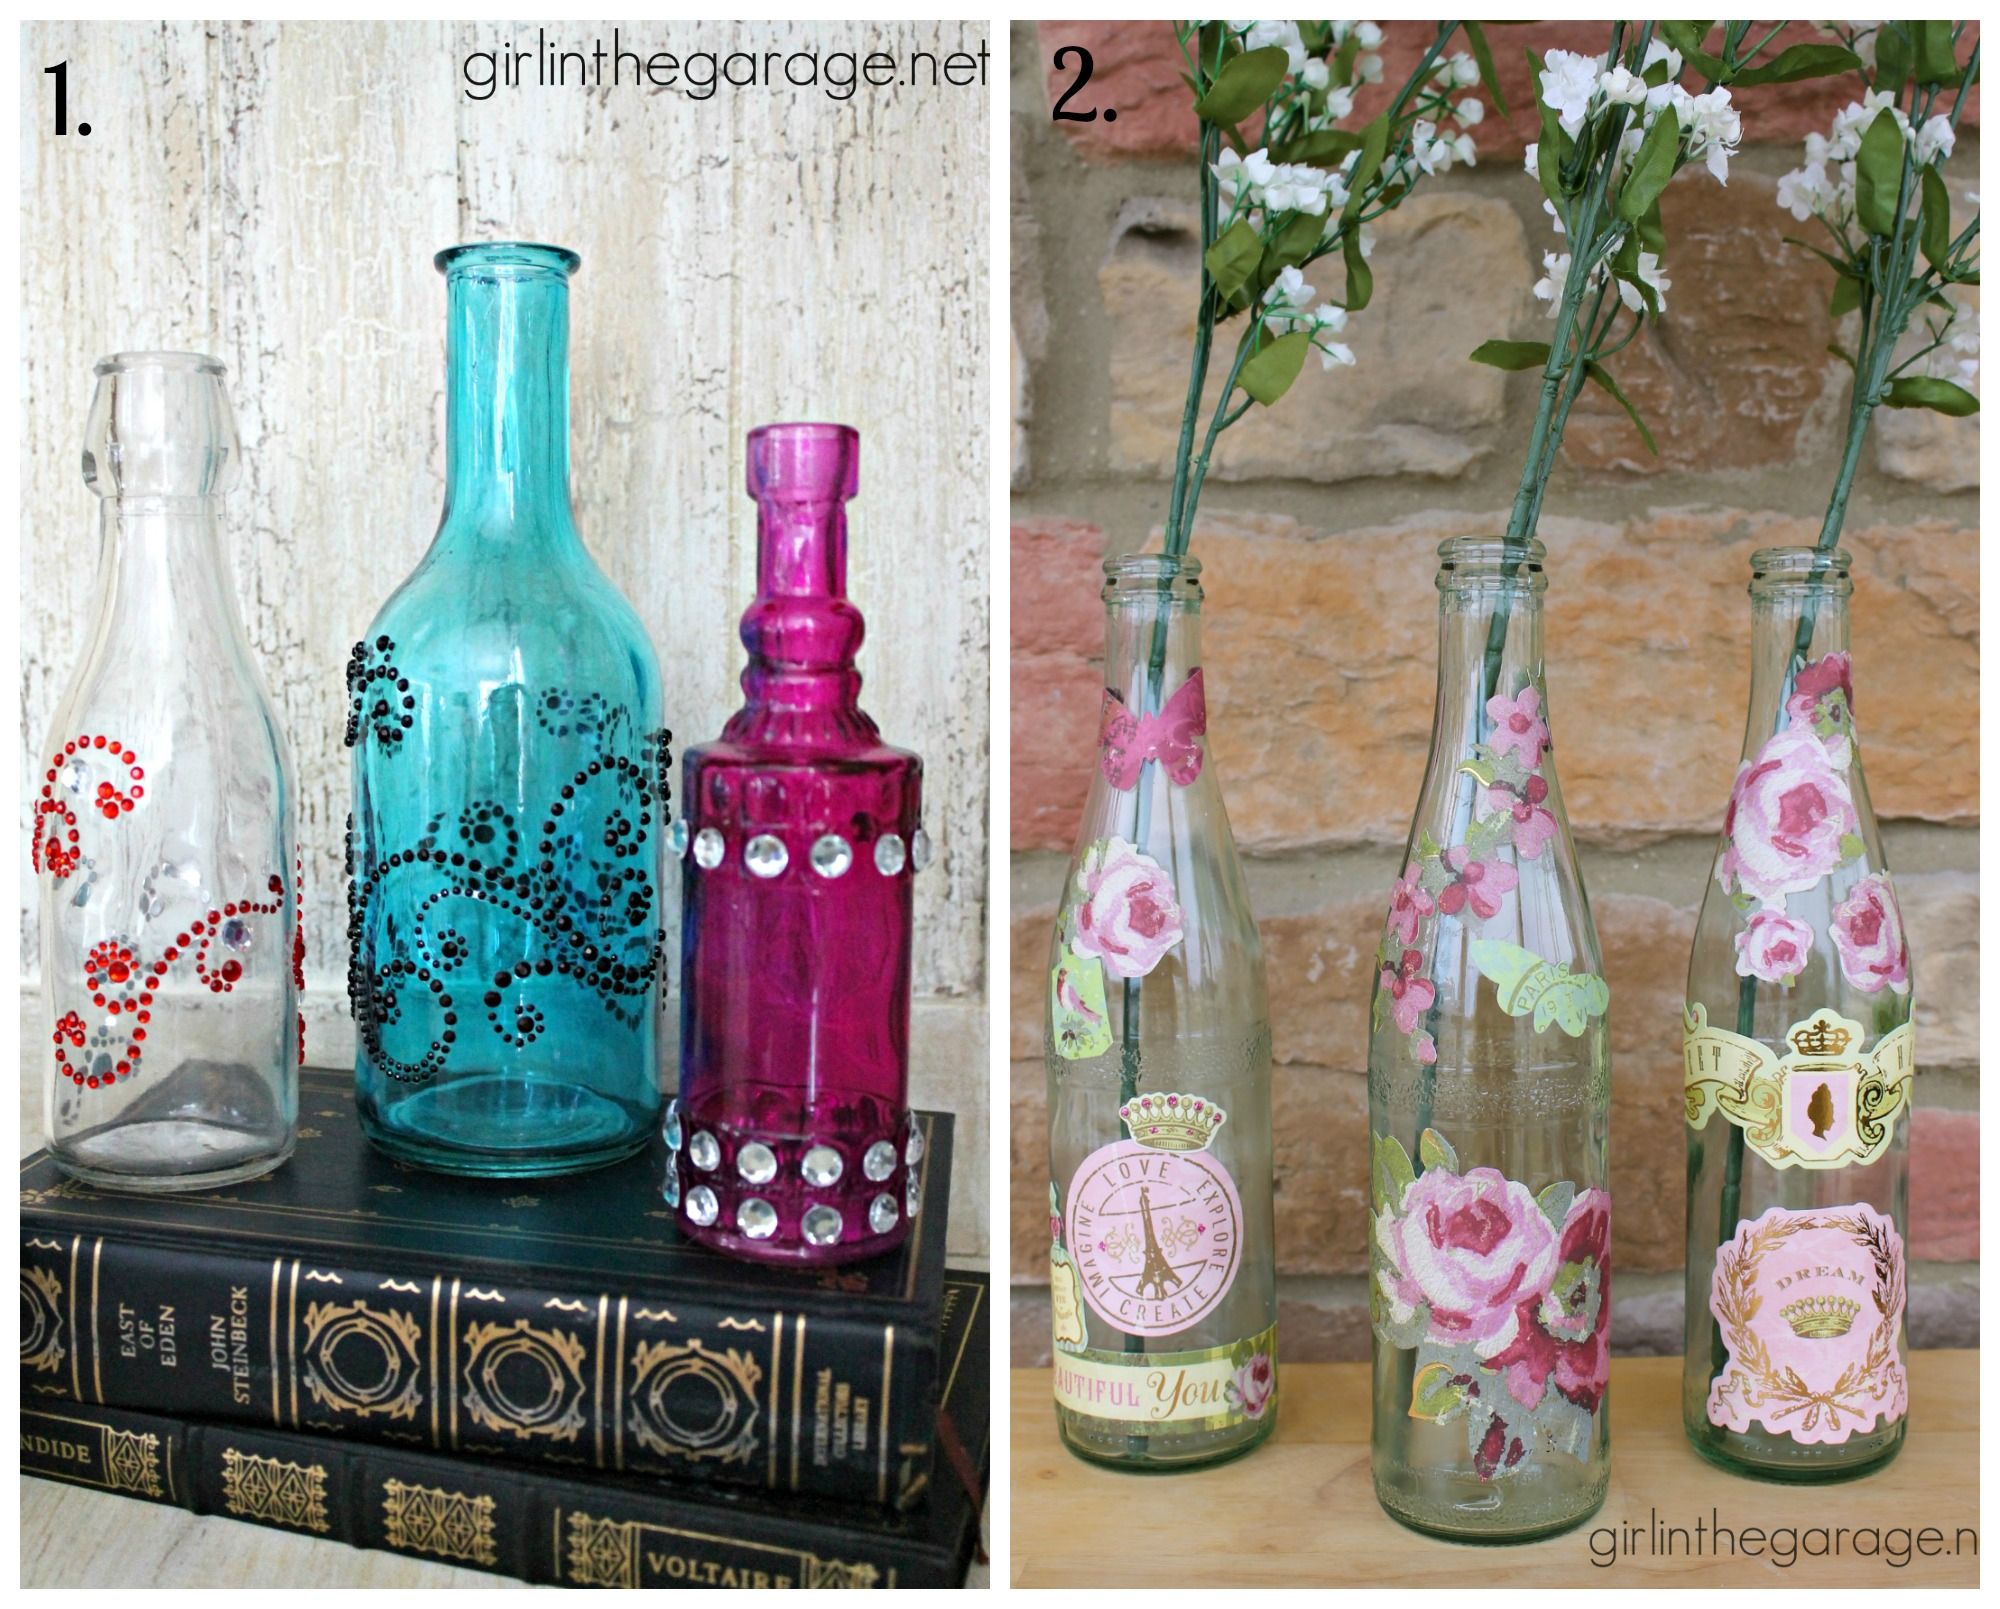 decorated bottles - Google-Suche | Creative projects | Pinterest ...